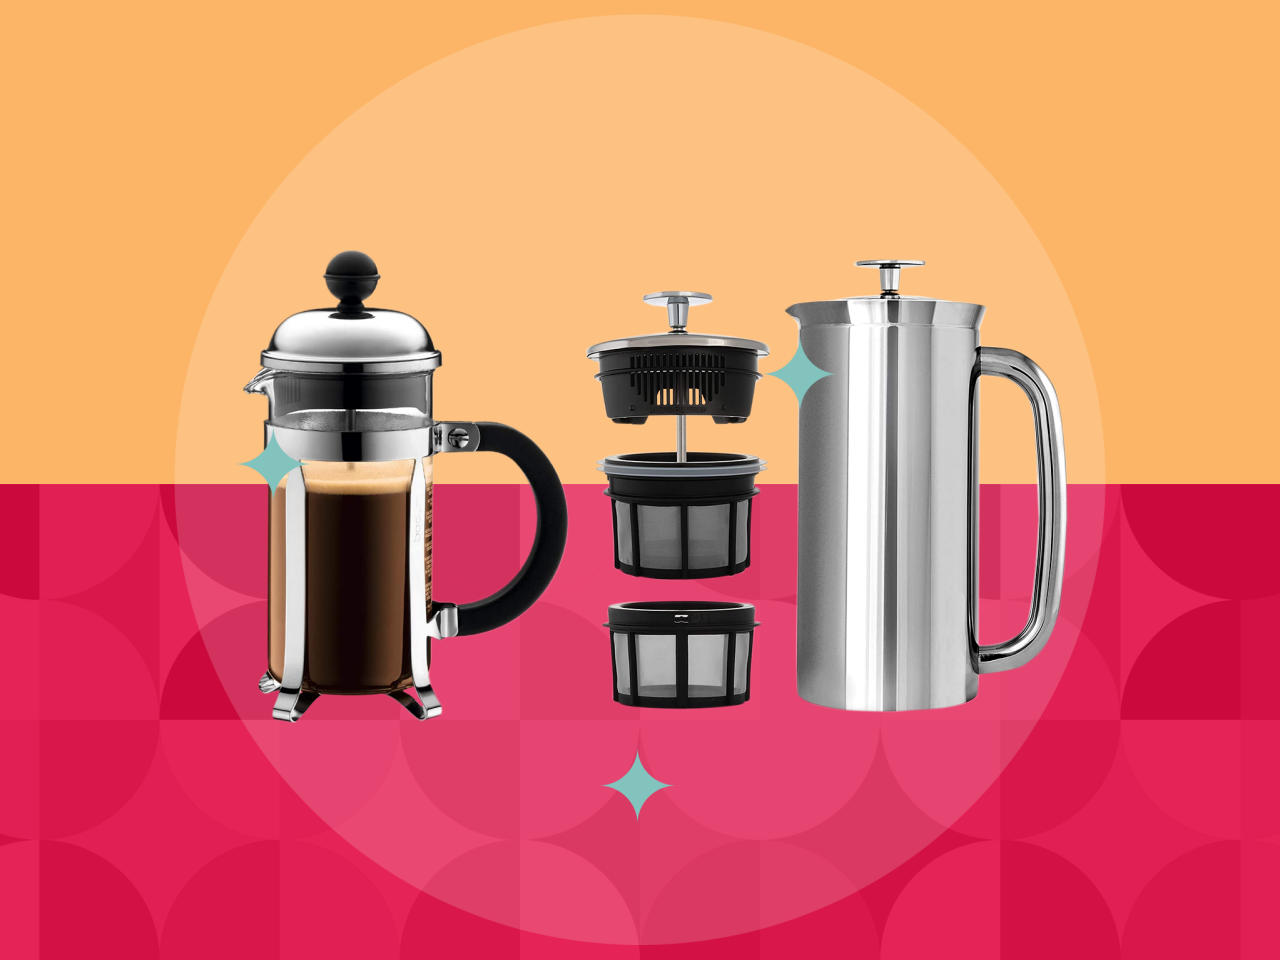 https://food.fnr.sndimg.com/content/dam/images/food/fullset/2023/3/16/FN_ProductTestingImages-FRENCH-PRESS_s4x3.png.rend.hgtvcom.1280.960.suffix/1678994863118.png